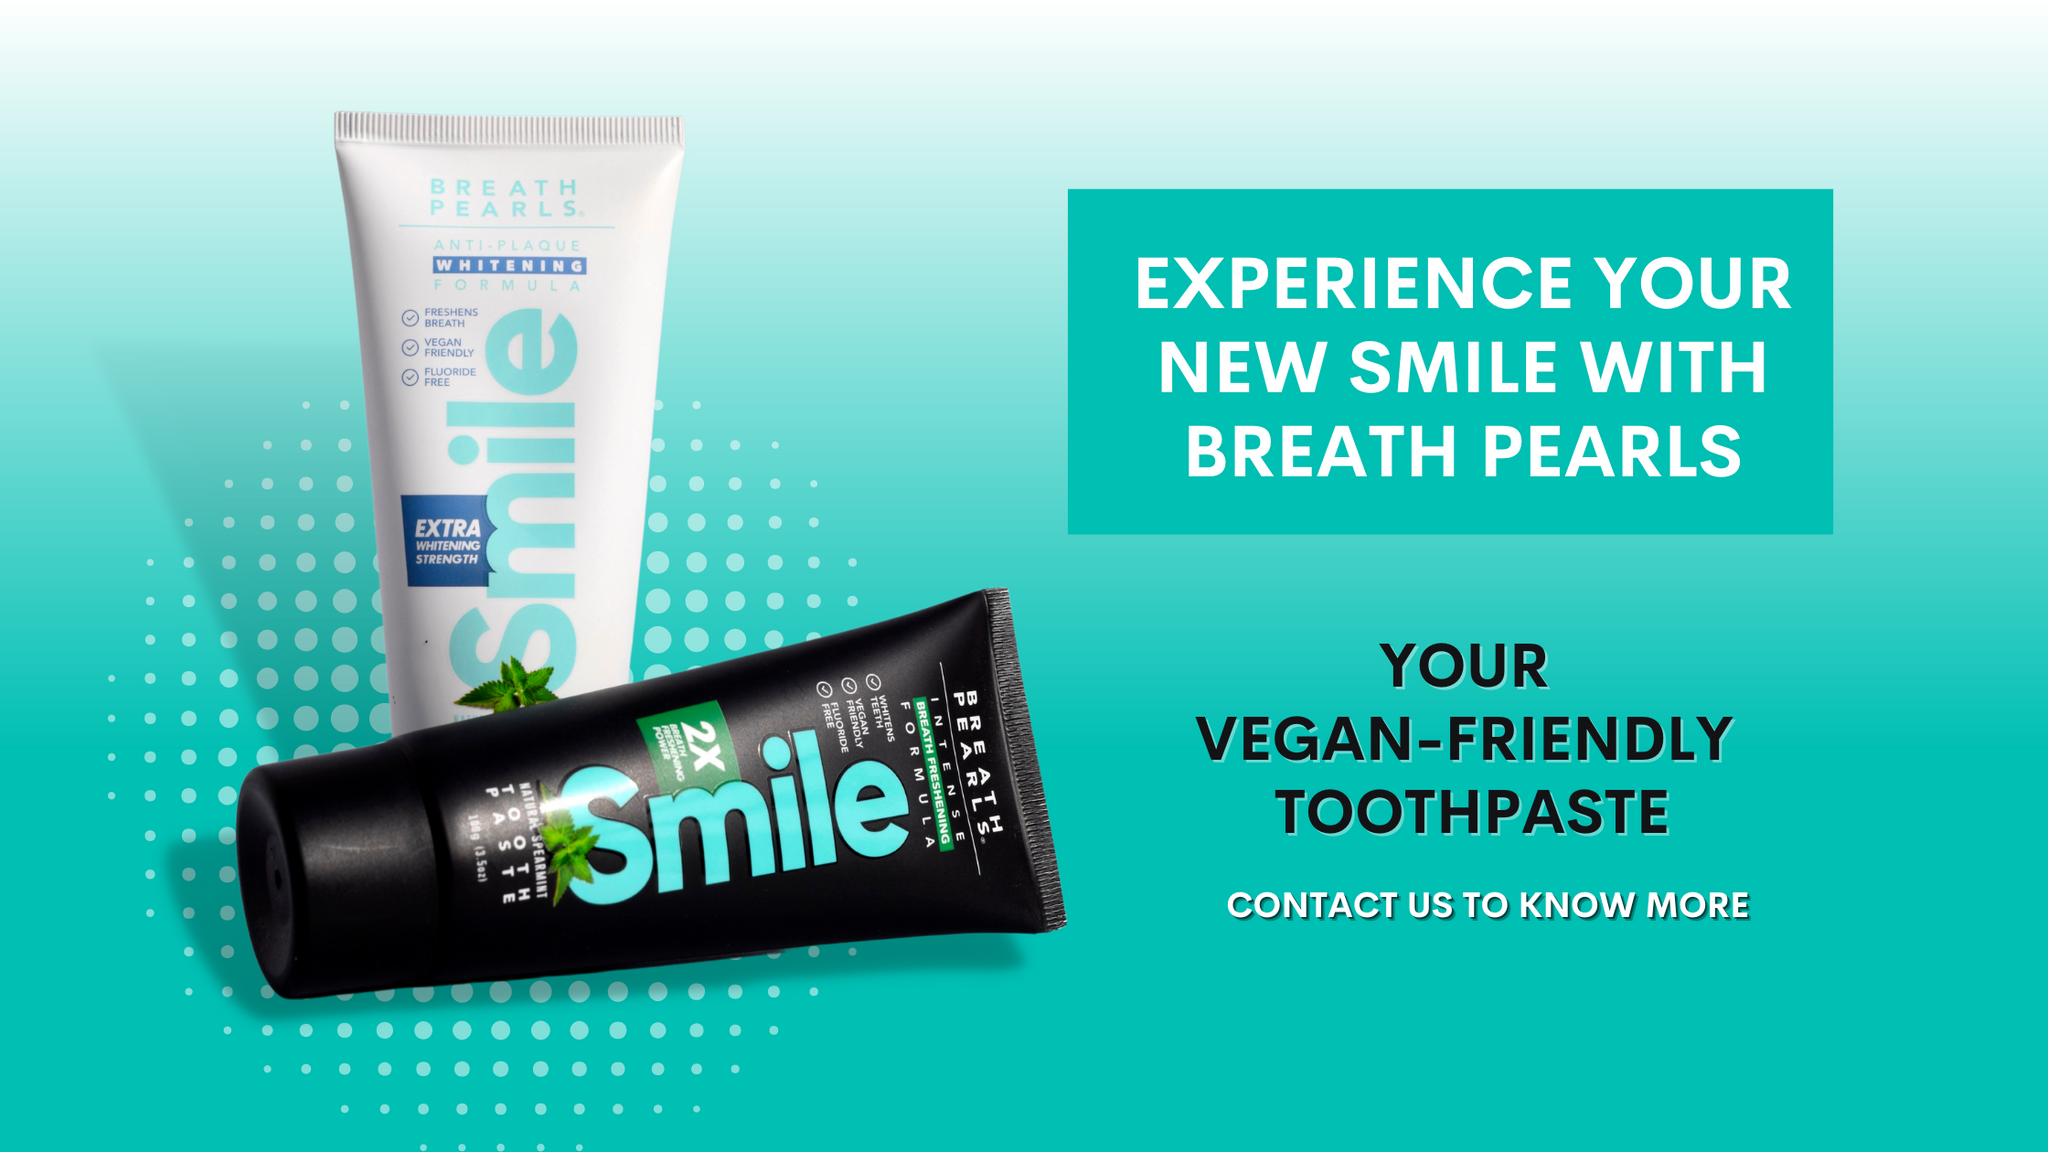 WHAT IS A VEGAN-FRIENDLY TOOTHPASTE?